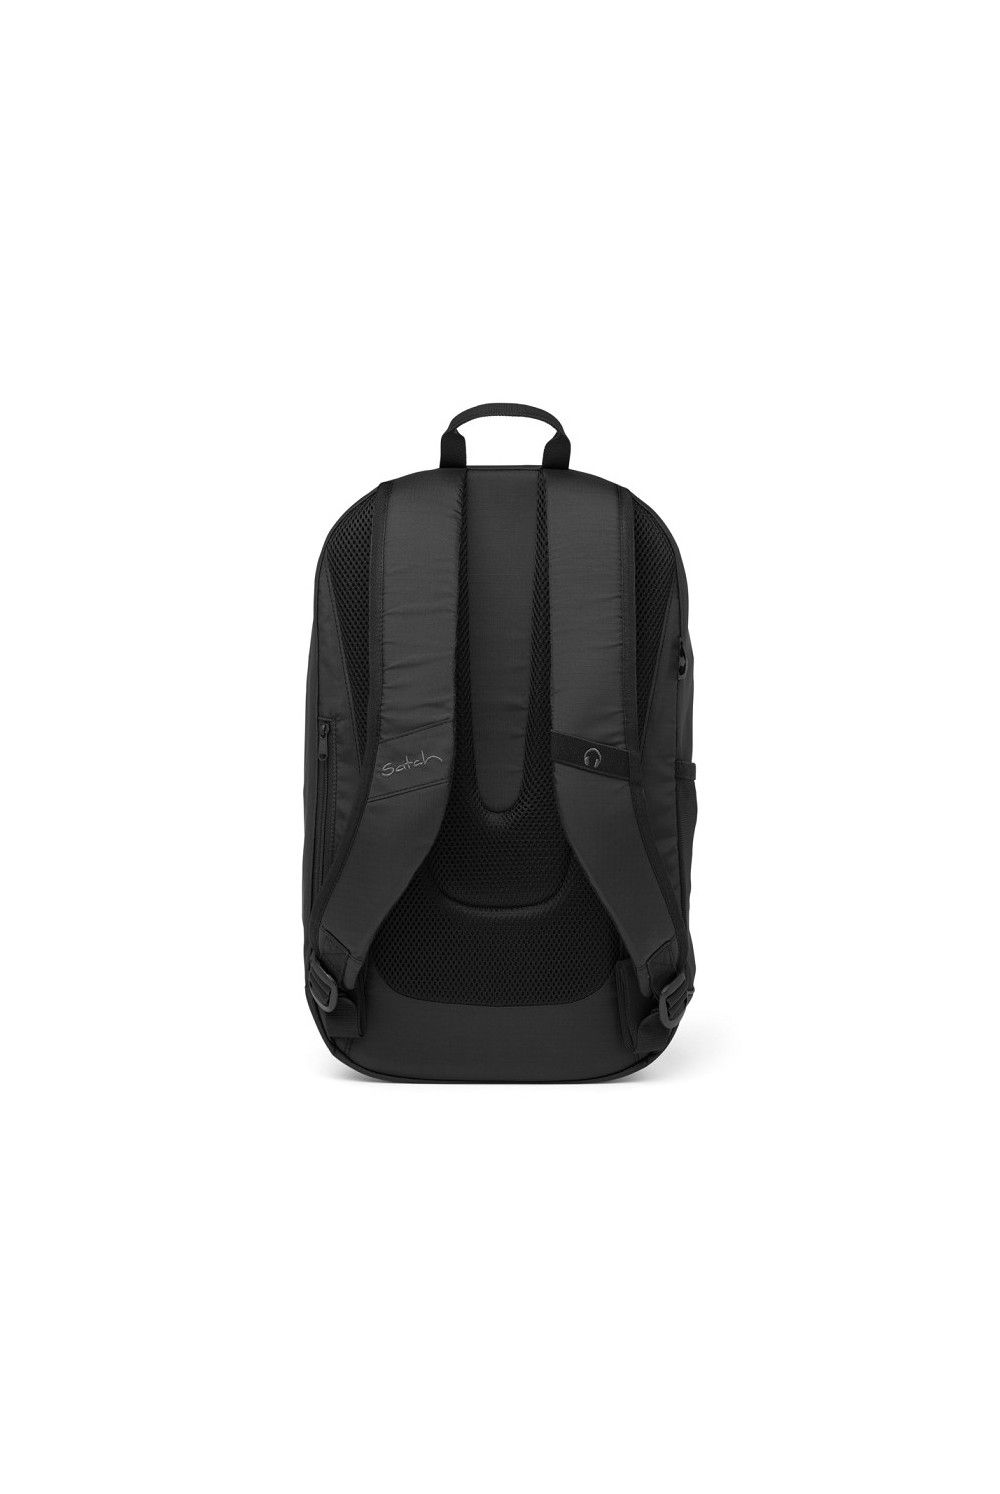 Satch Backpack Fly Ripstop Black